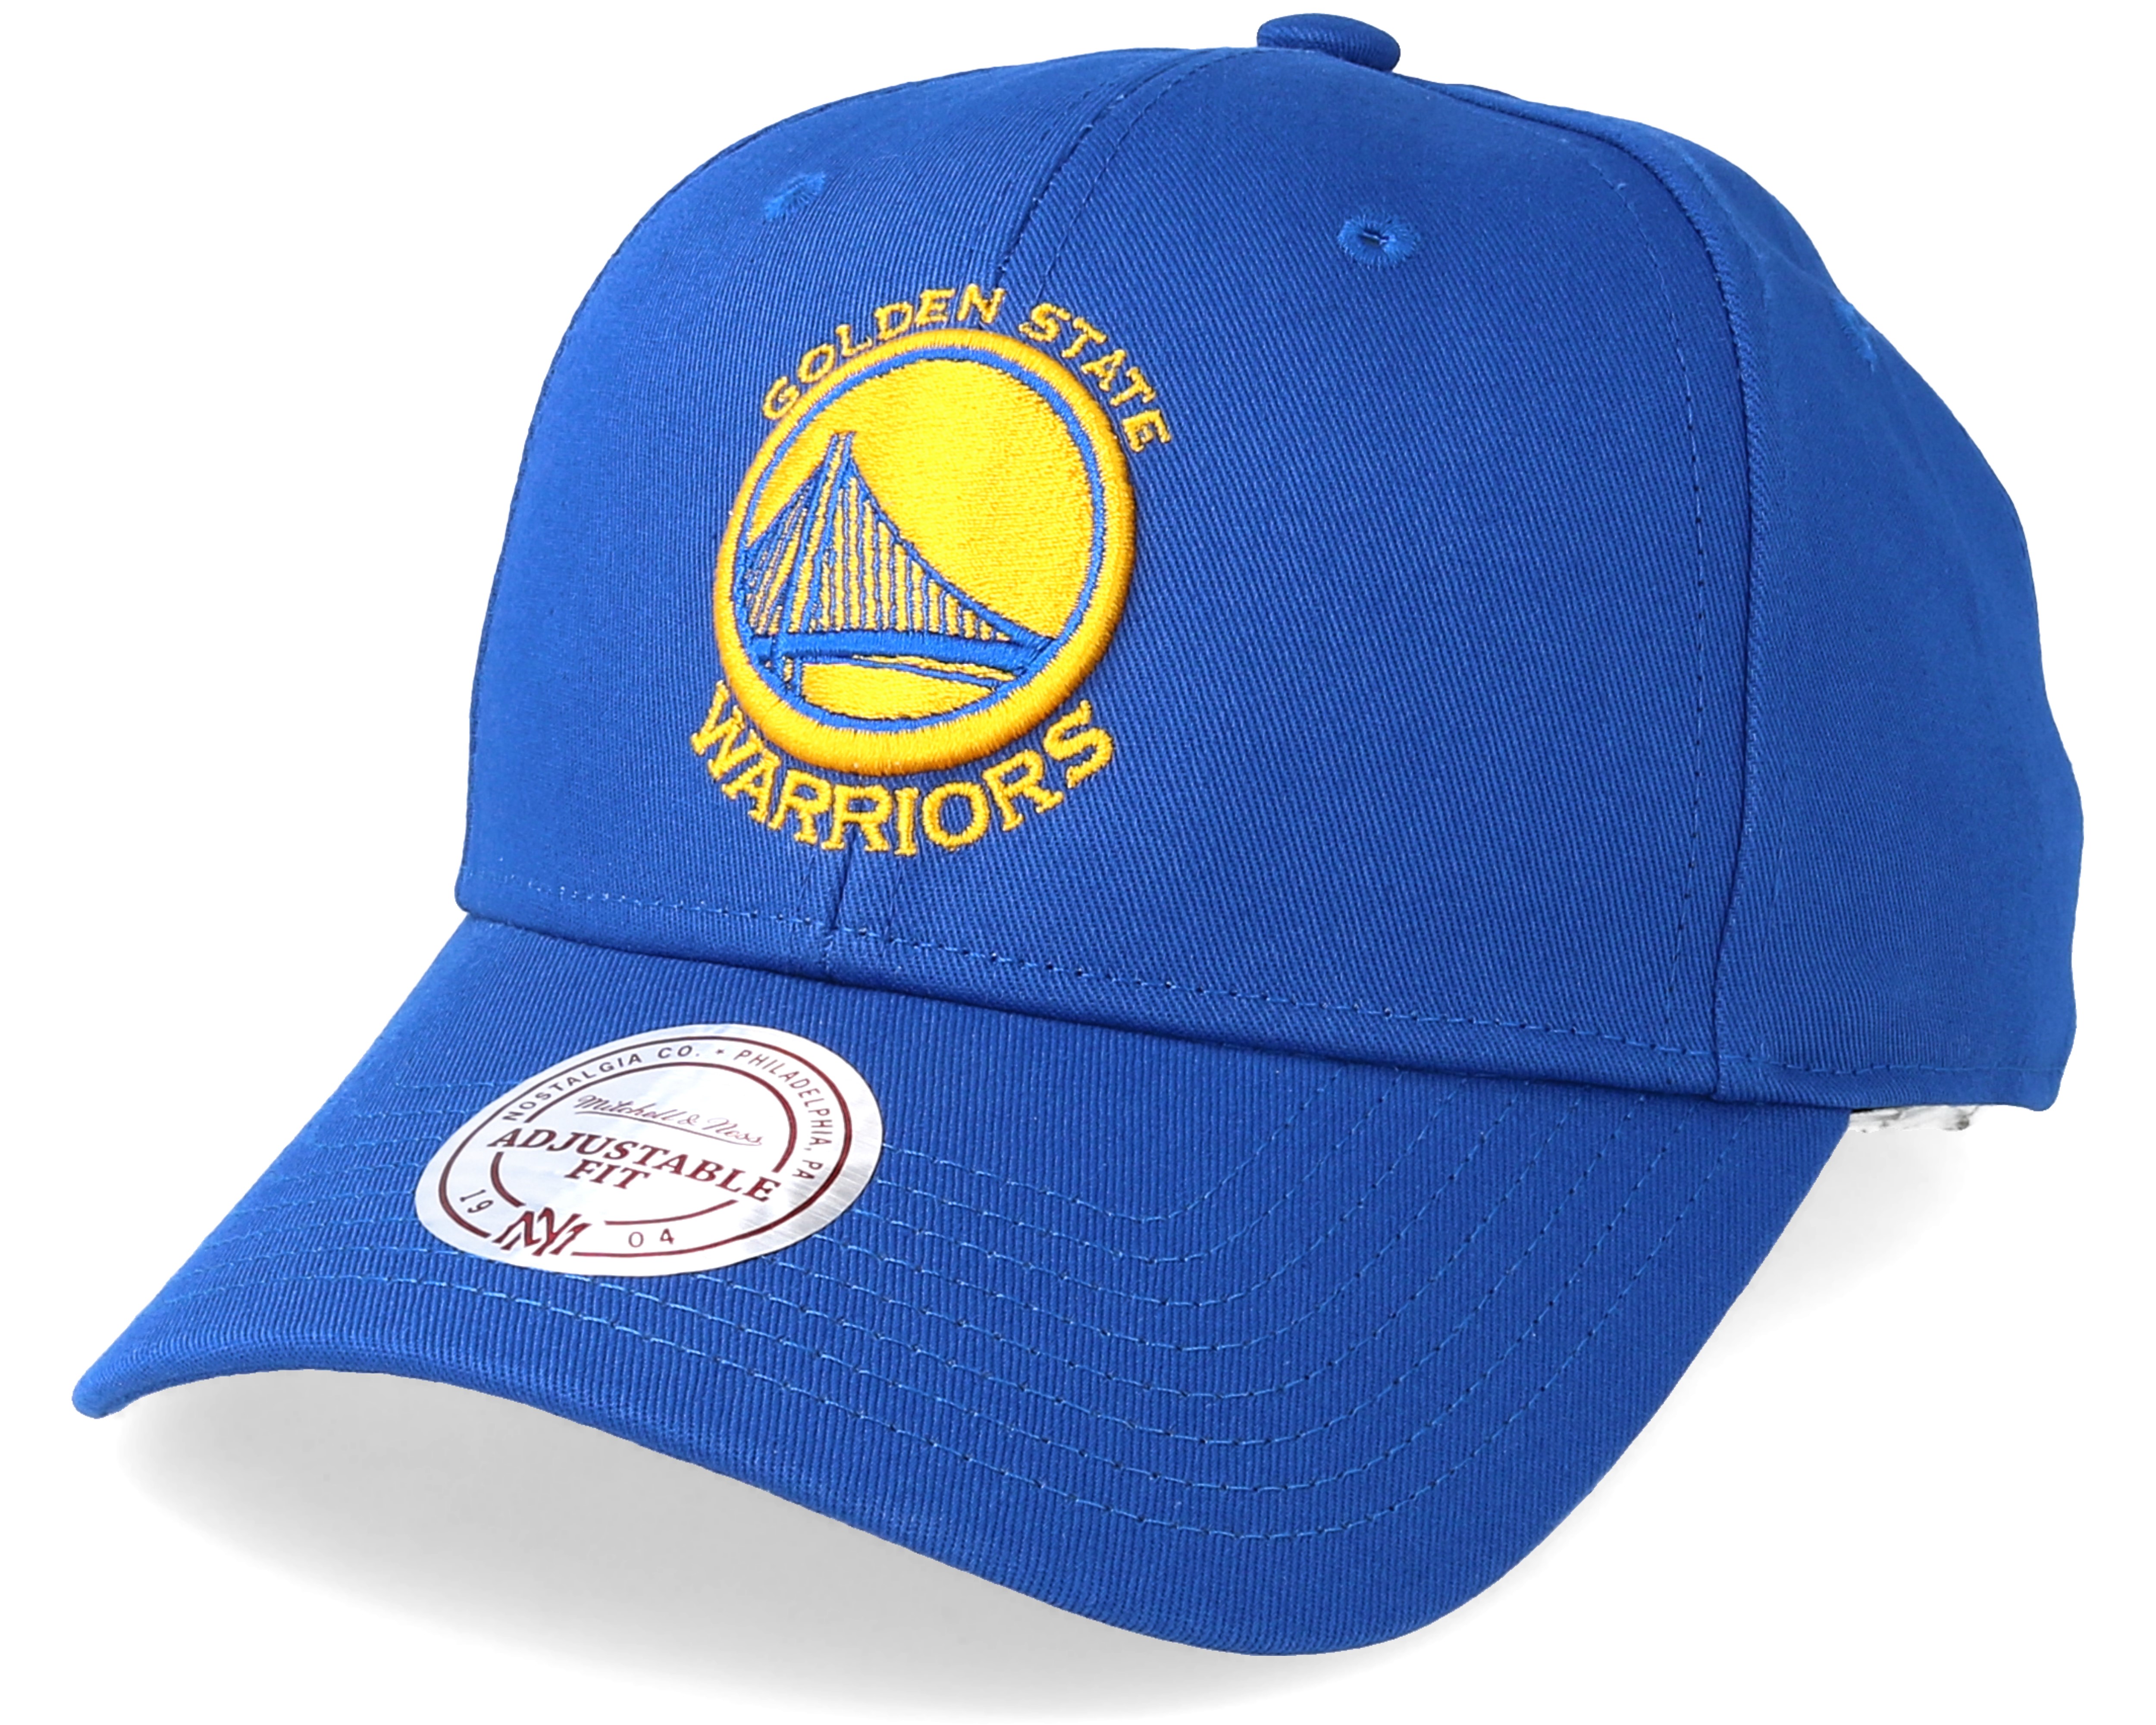 Golden State Warriors Low Pro Royal Adjustable - Mitchell & Ness caps ...